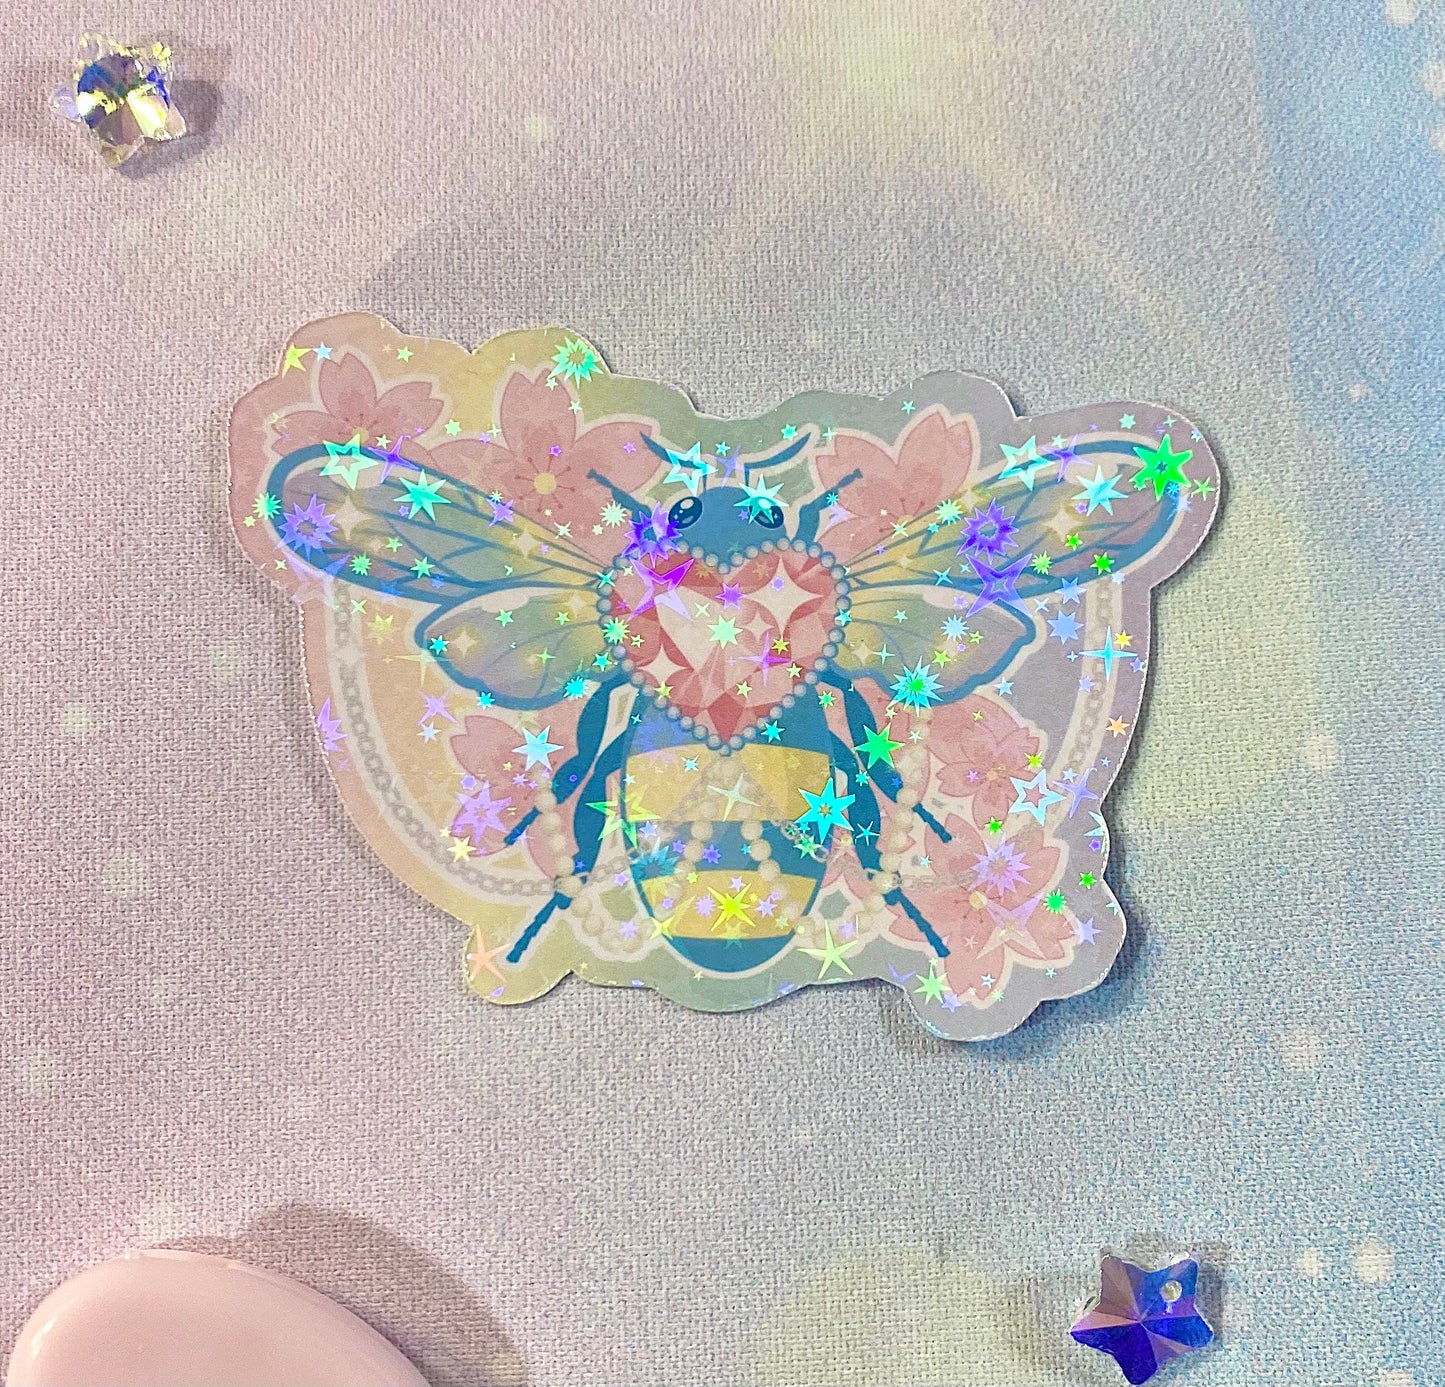 Bee-jeweled Sticker | bee stickers, cute bumble bees, Kawaii stickers, girly stickers